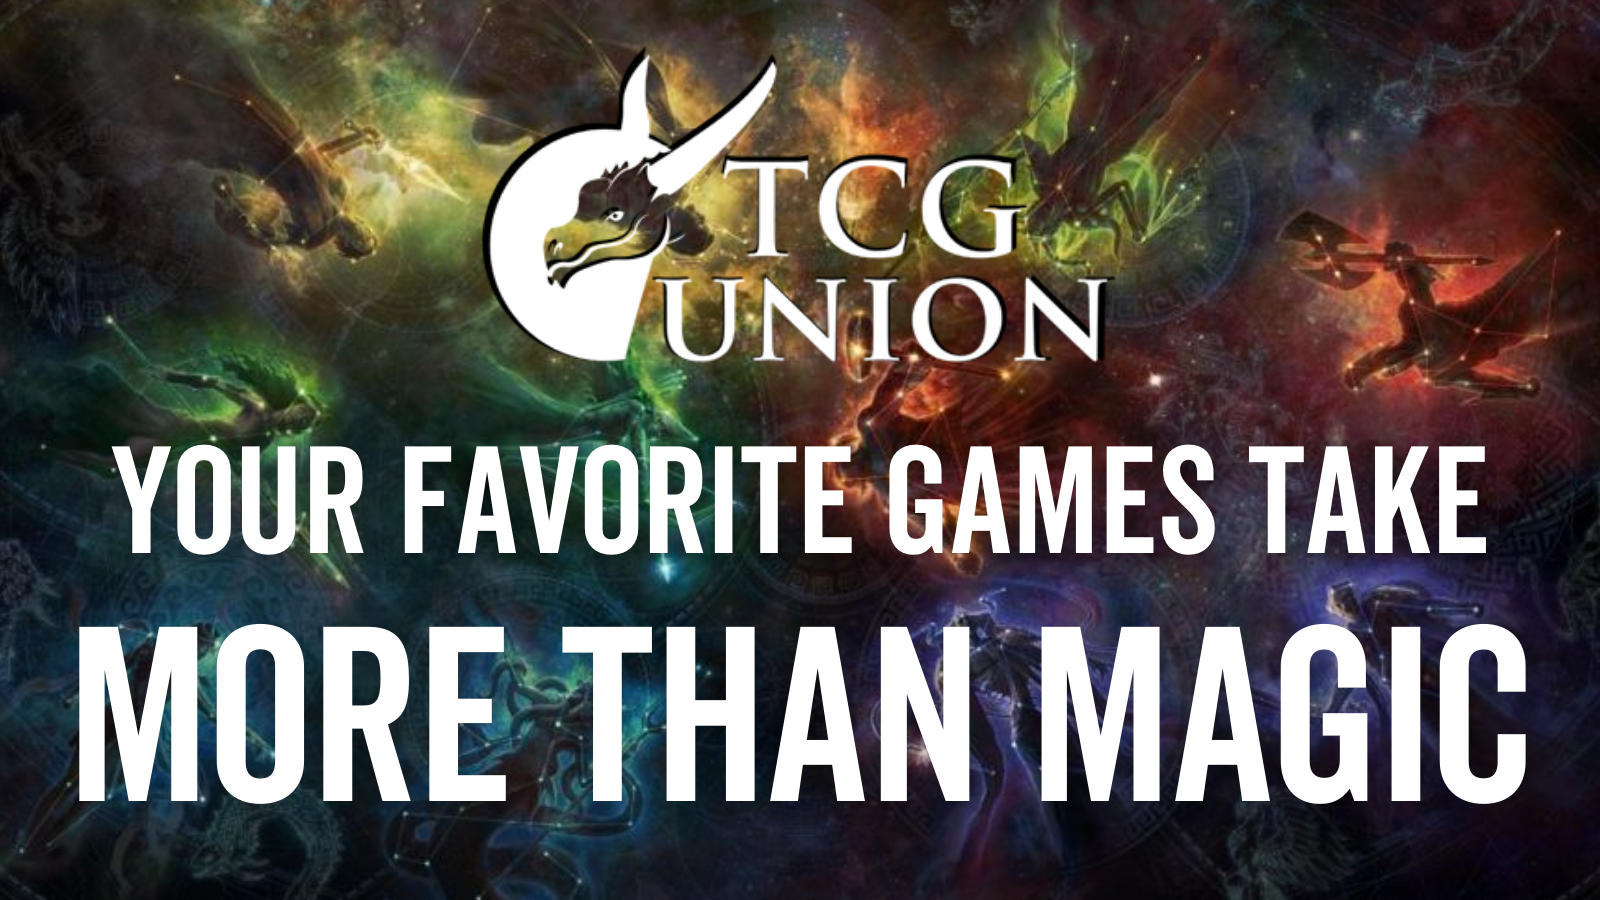 An image of stars and constellations with the TCG Union logo and the words, “Your favorite games take more than magic.”